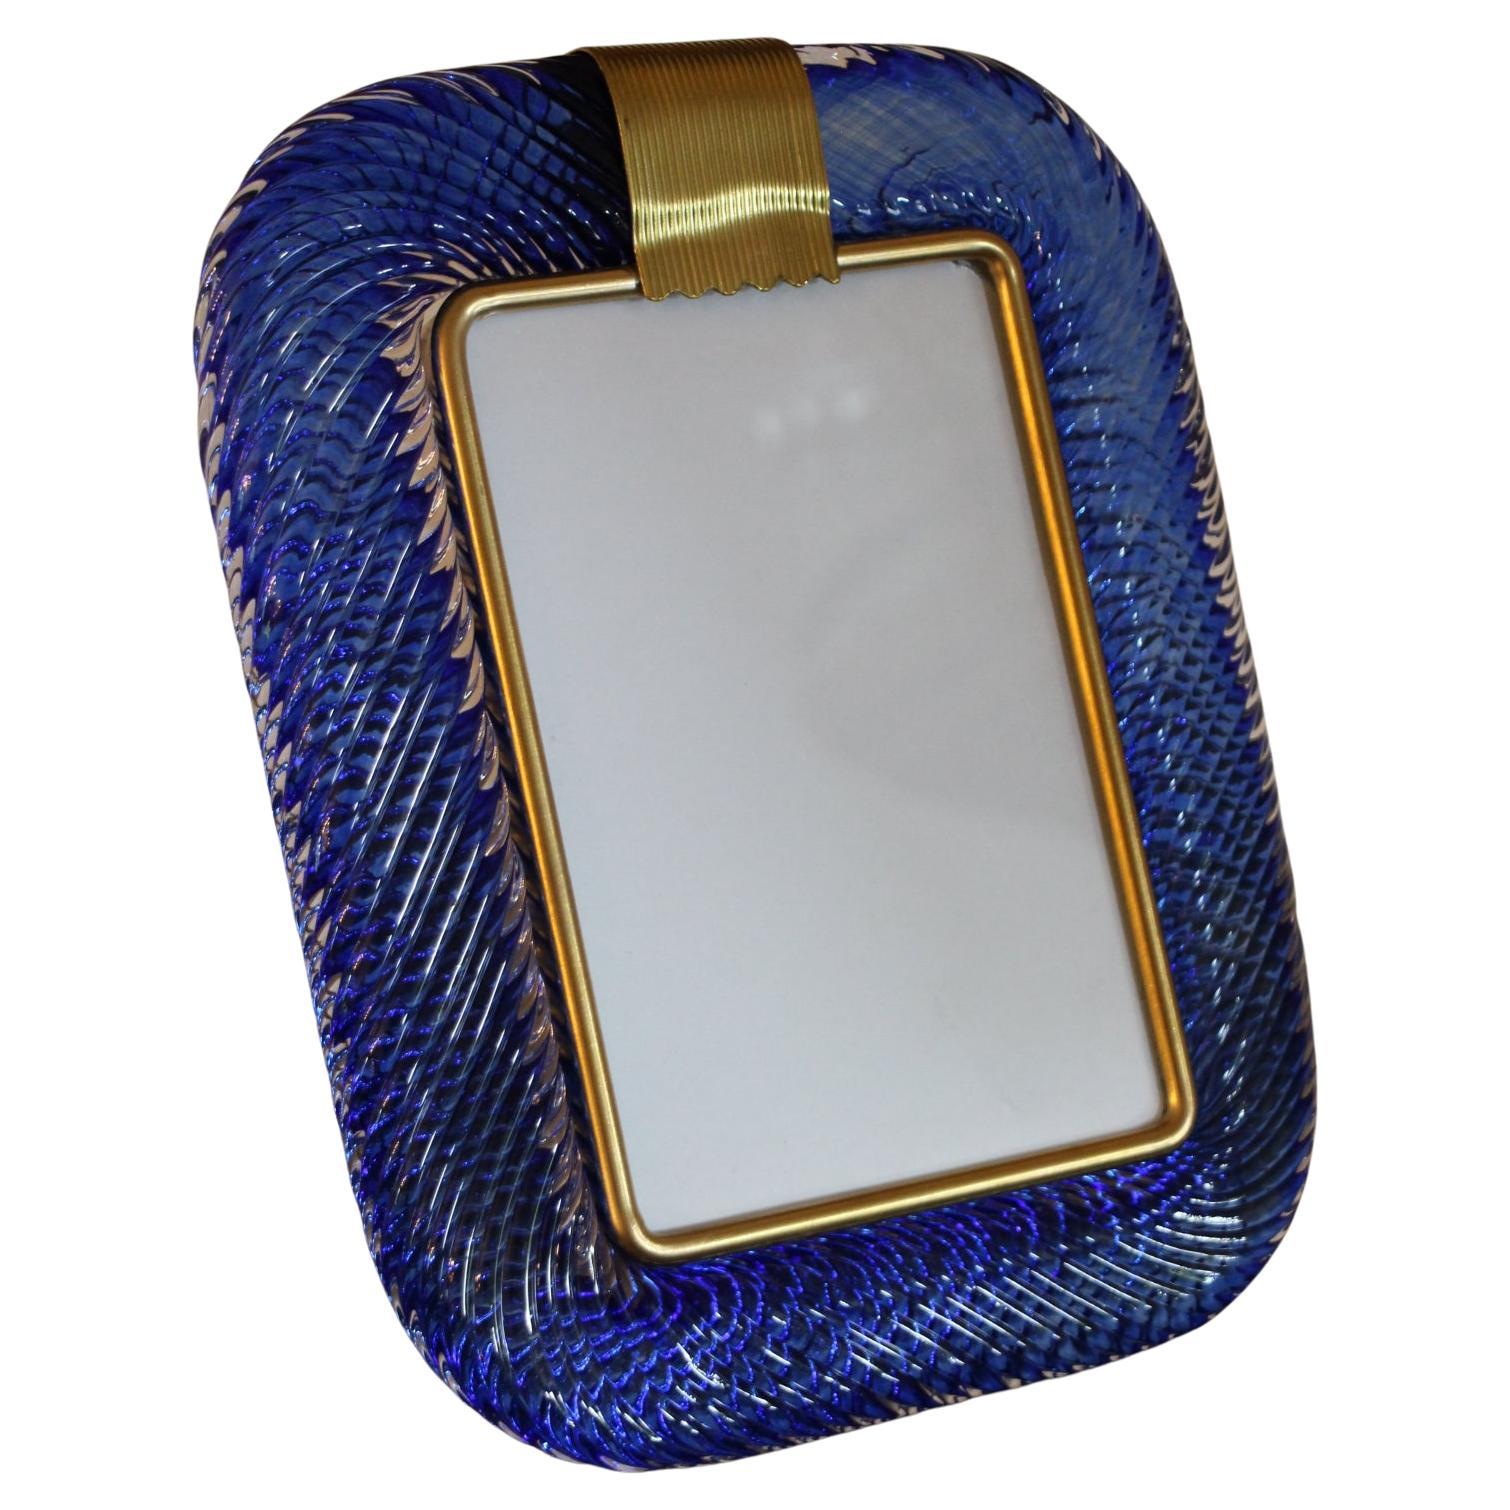 2000's Saphir Blue Twisted Murano Glass and Brass Photo Frame by Barovier e Toso For Sale